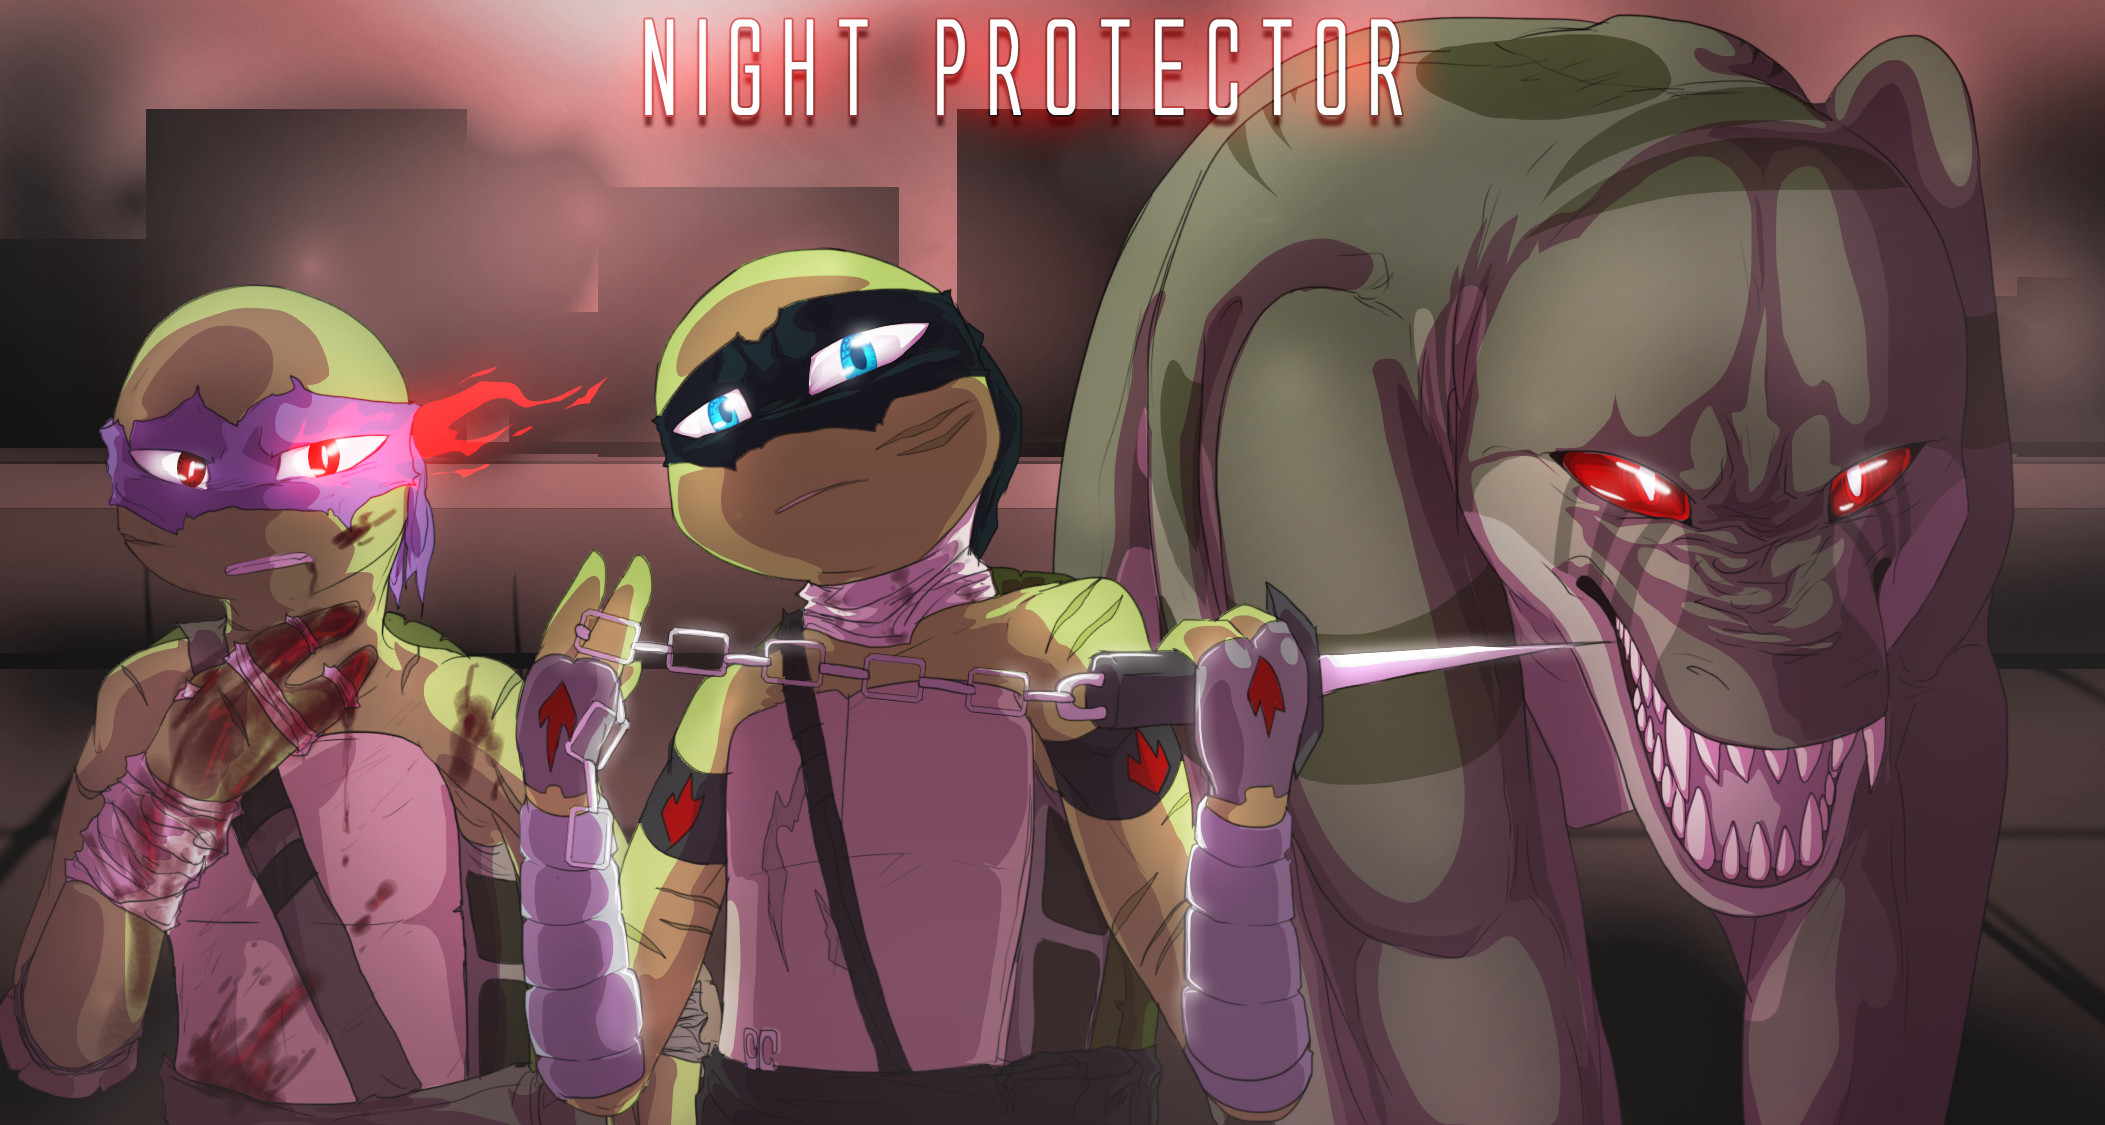 2105x1125 TMNT Night Protector Wallpaper by GolzyDee TMNT Night Protector Wallpaper  by GolzyDee